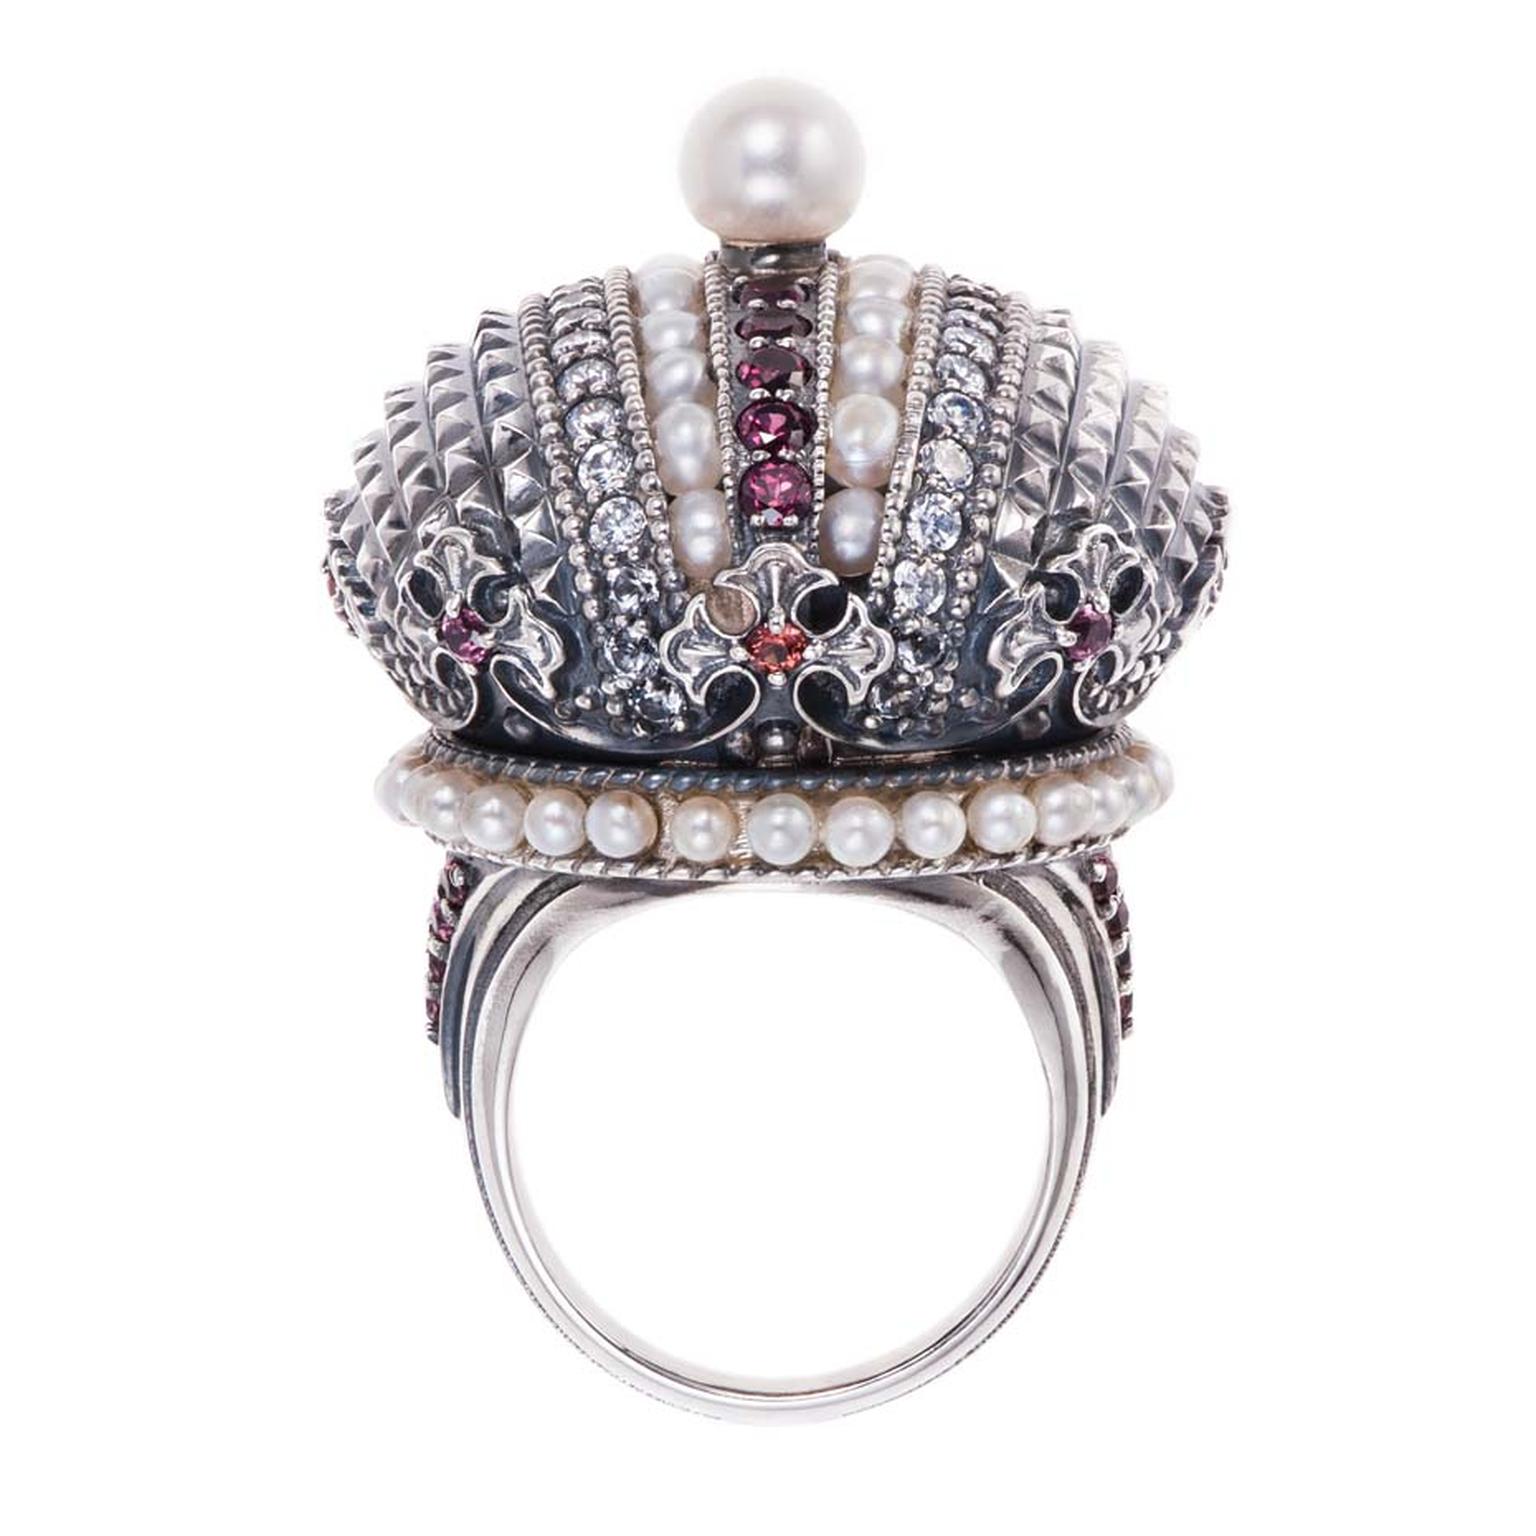 Petr Axenoff silver Ekaterina 2 ring featuring garnets, sapphires and pearls.